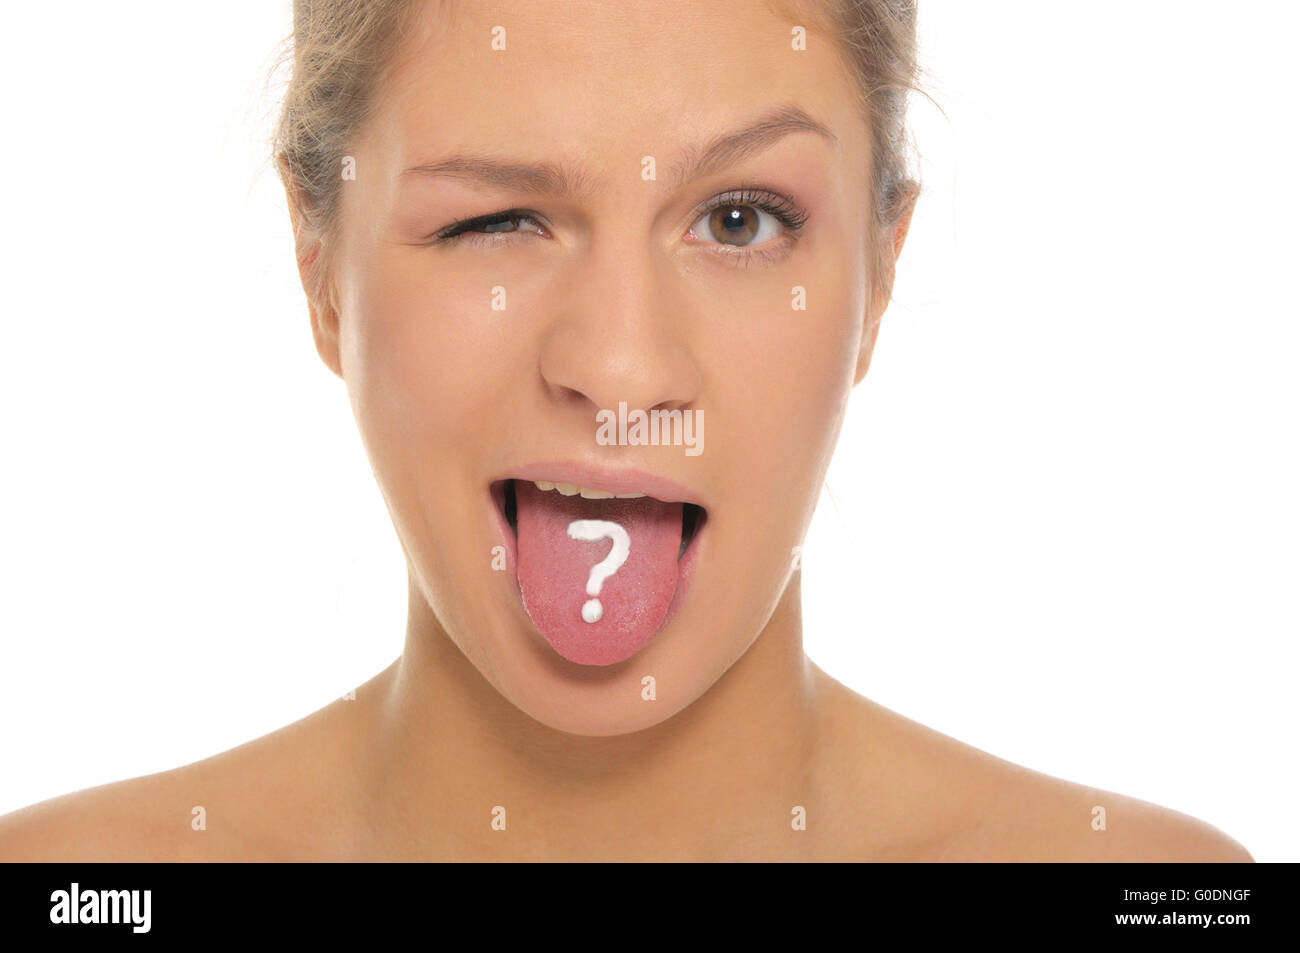 woman puts out tongue with drawn question mark Stock Photo